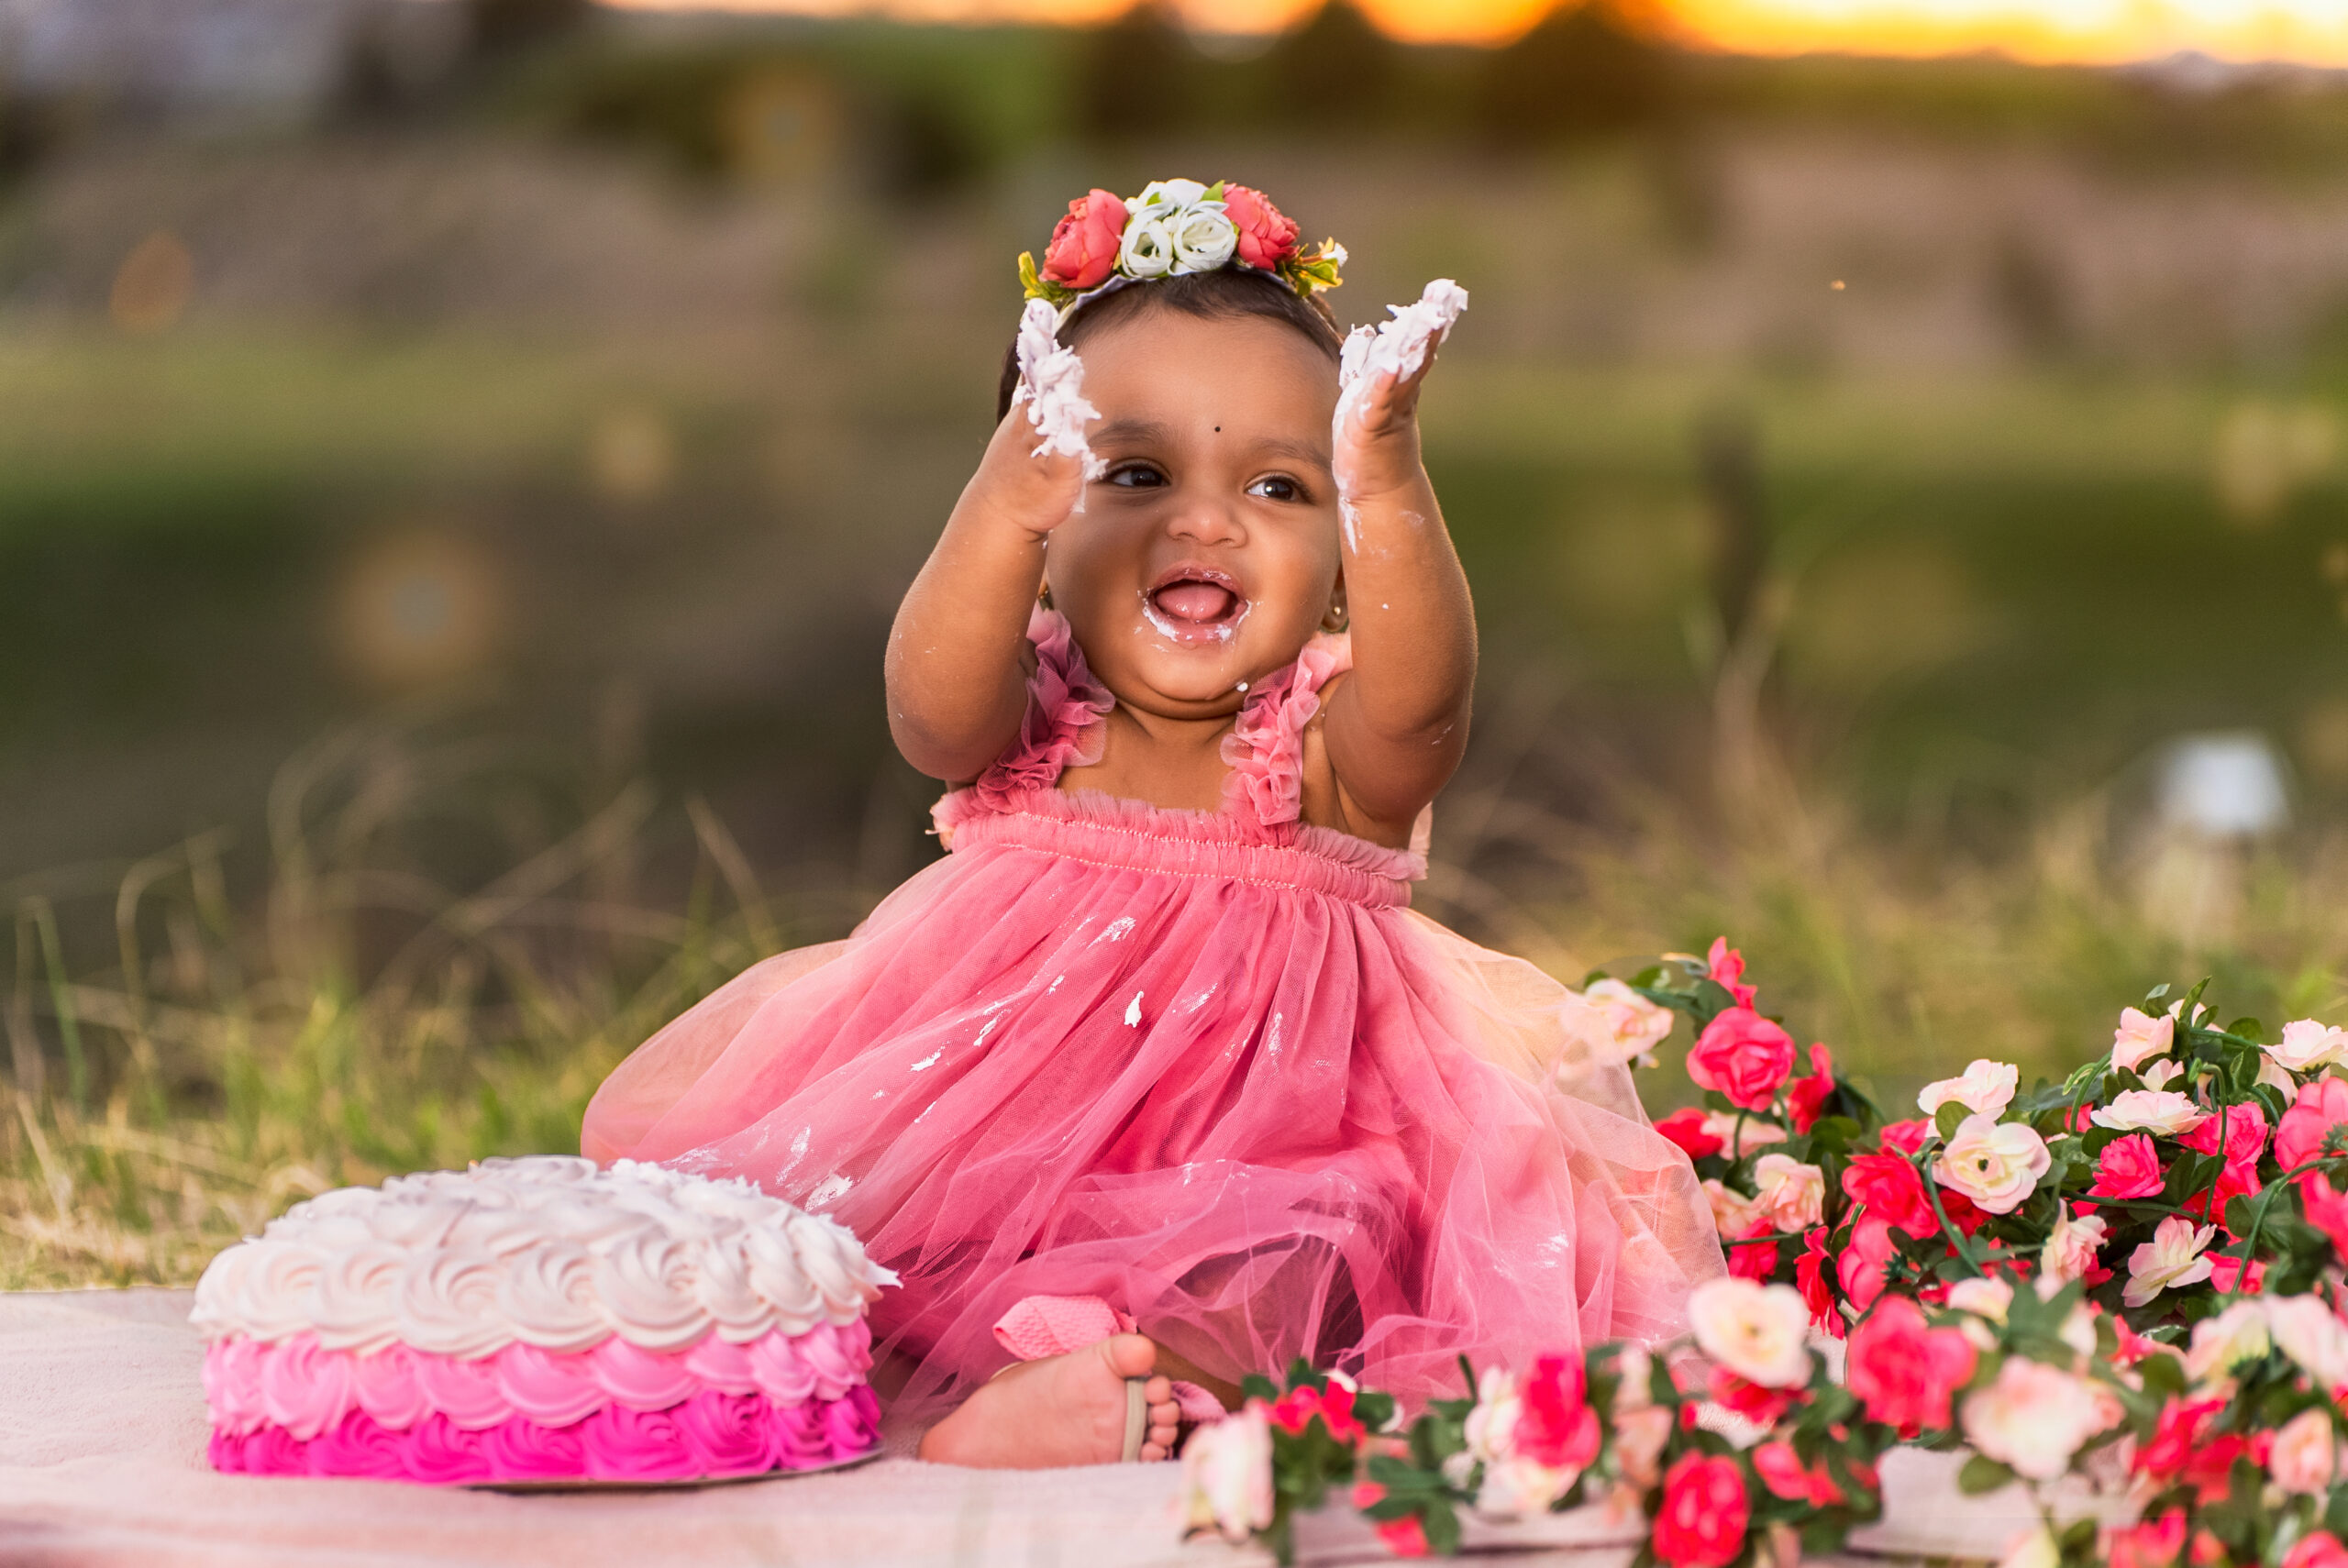 The Joyful Art of Cake Smash Photography: Capturing Sweet Moments in Messy Delight